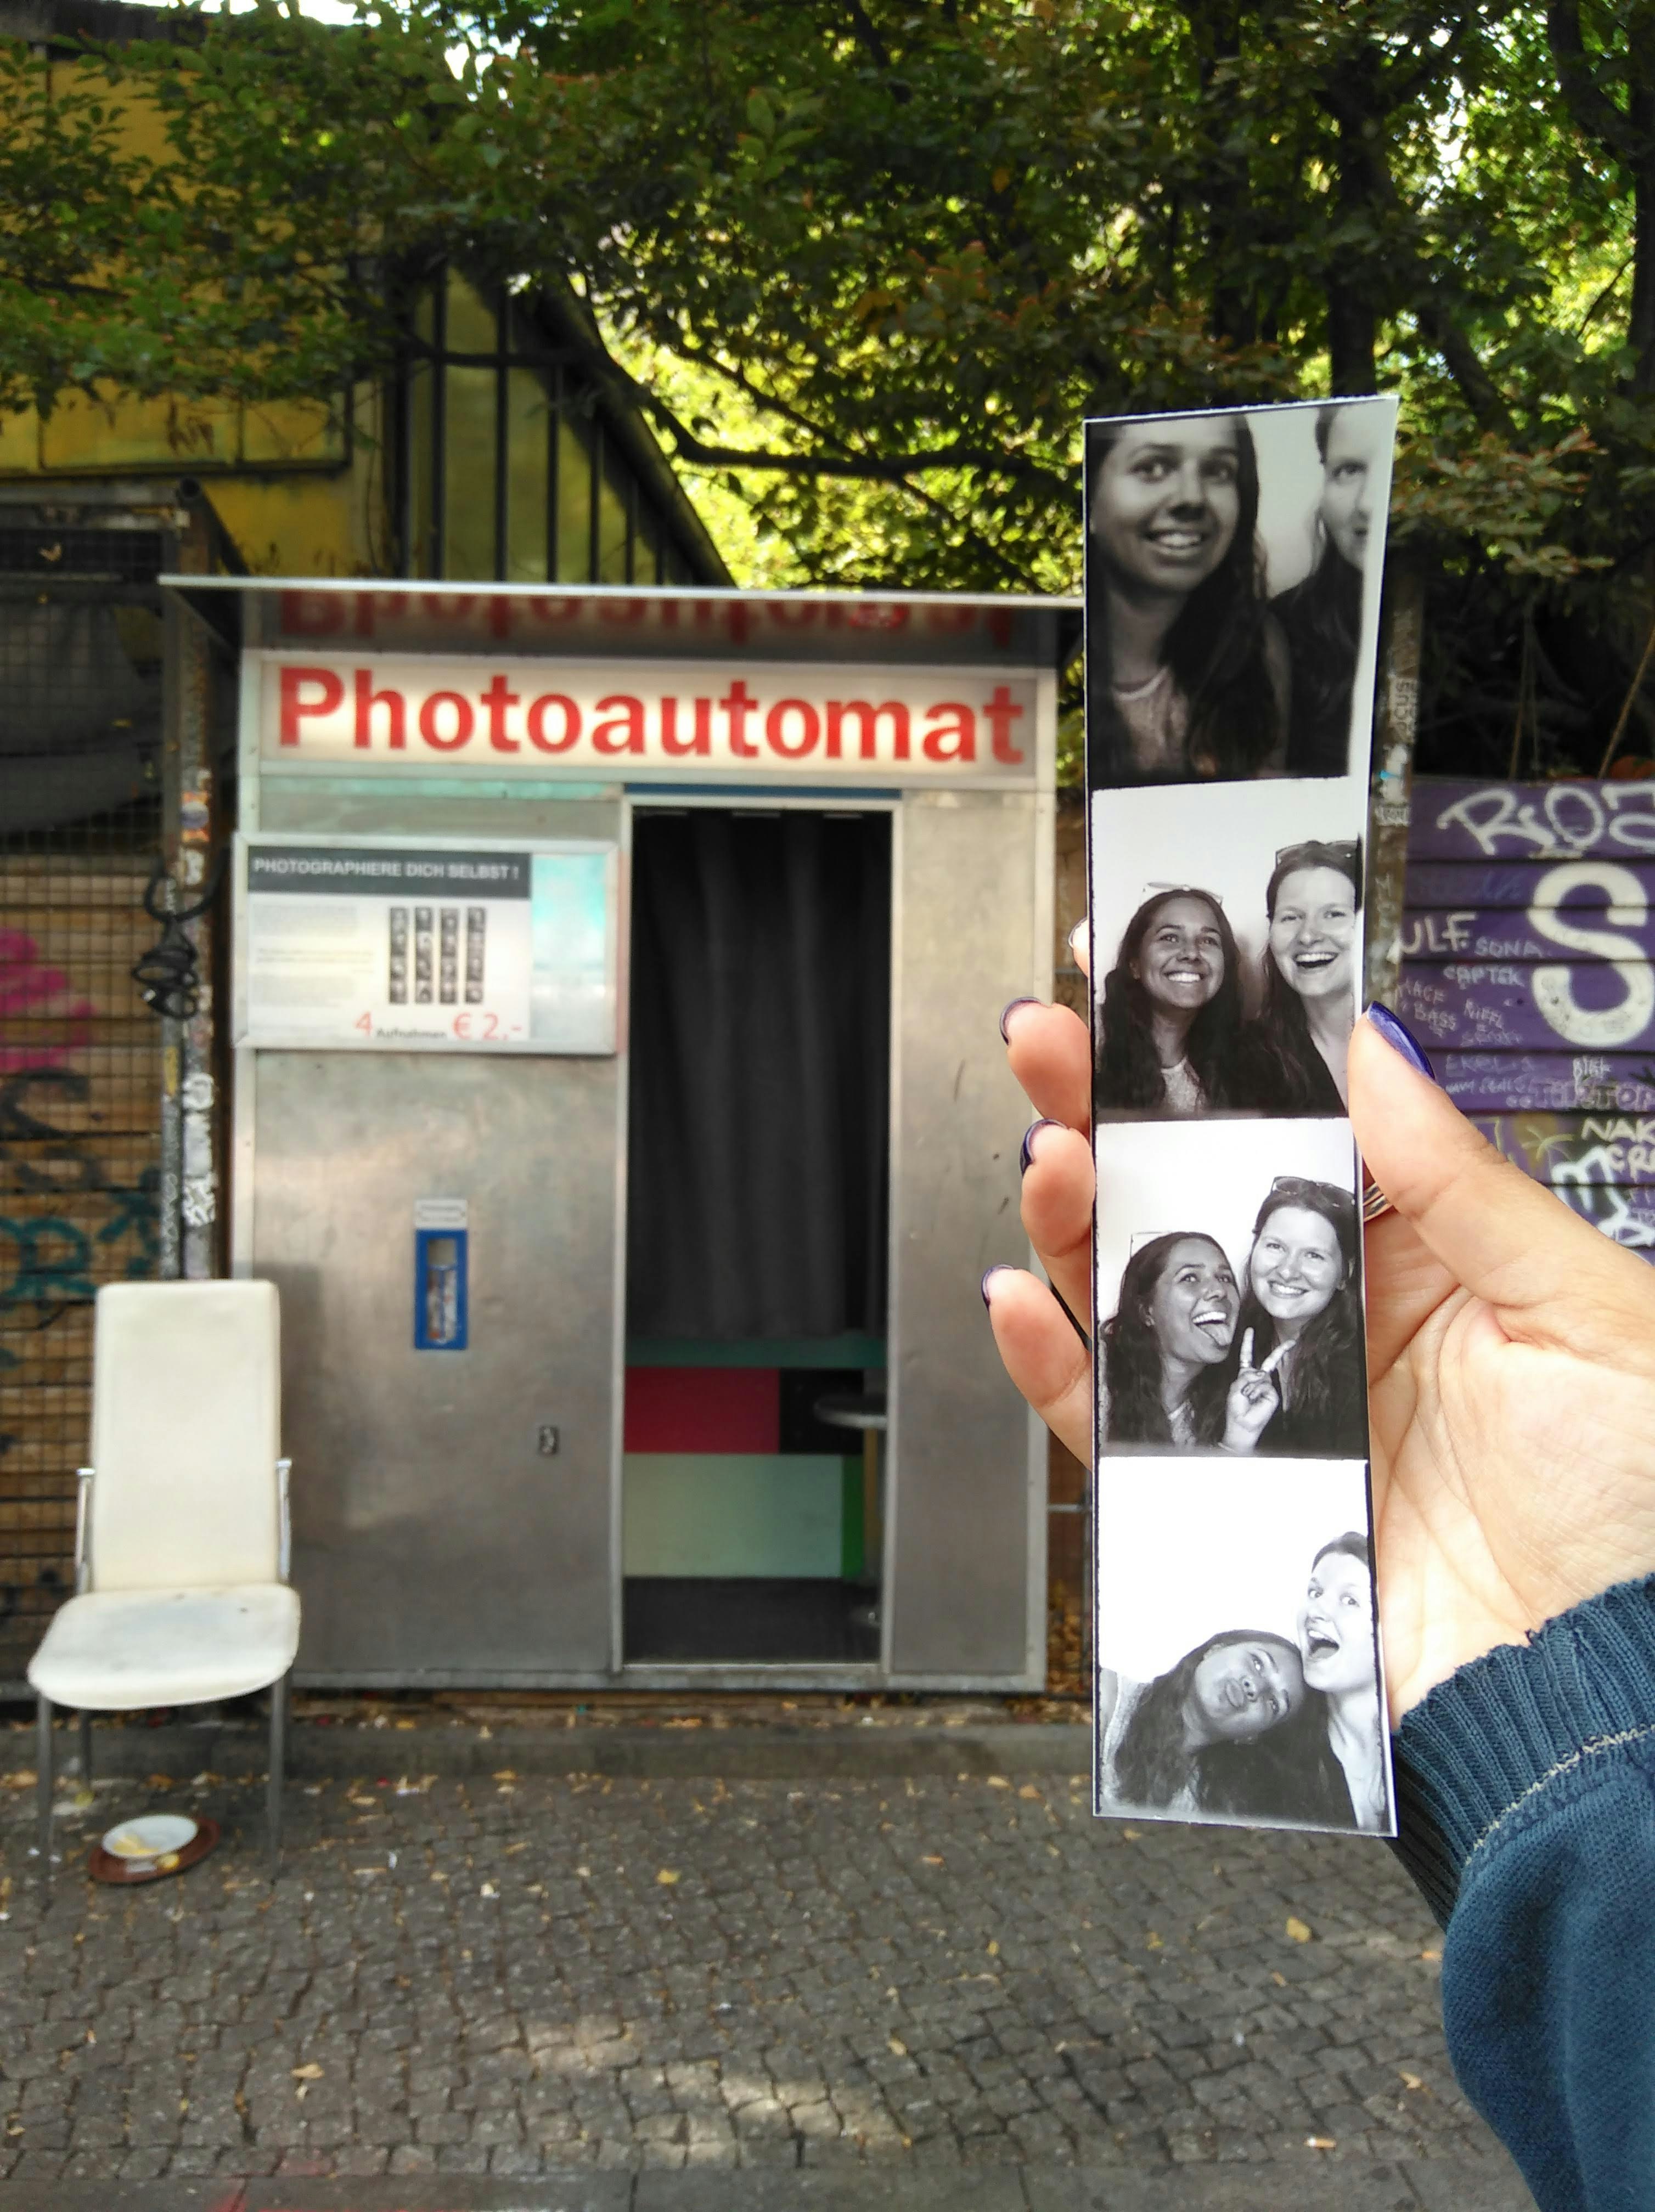 A Berlin 'Photoautomat' photo booth is in the background, while a hand reaches into the shot, holding a strip of four black-and-white photos of the writer and her friend.